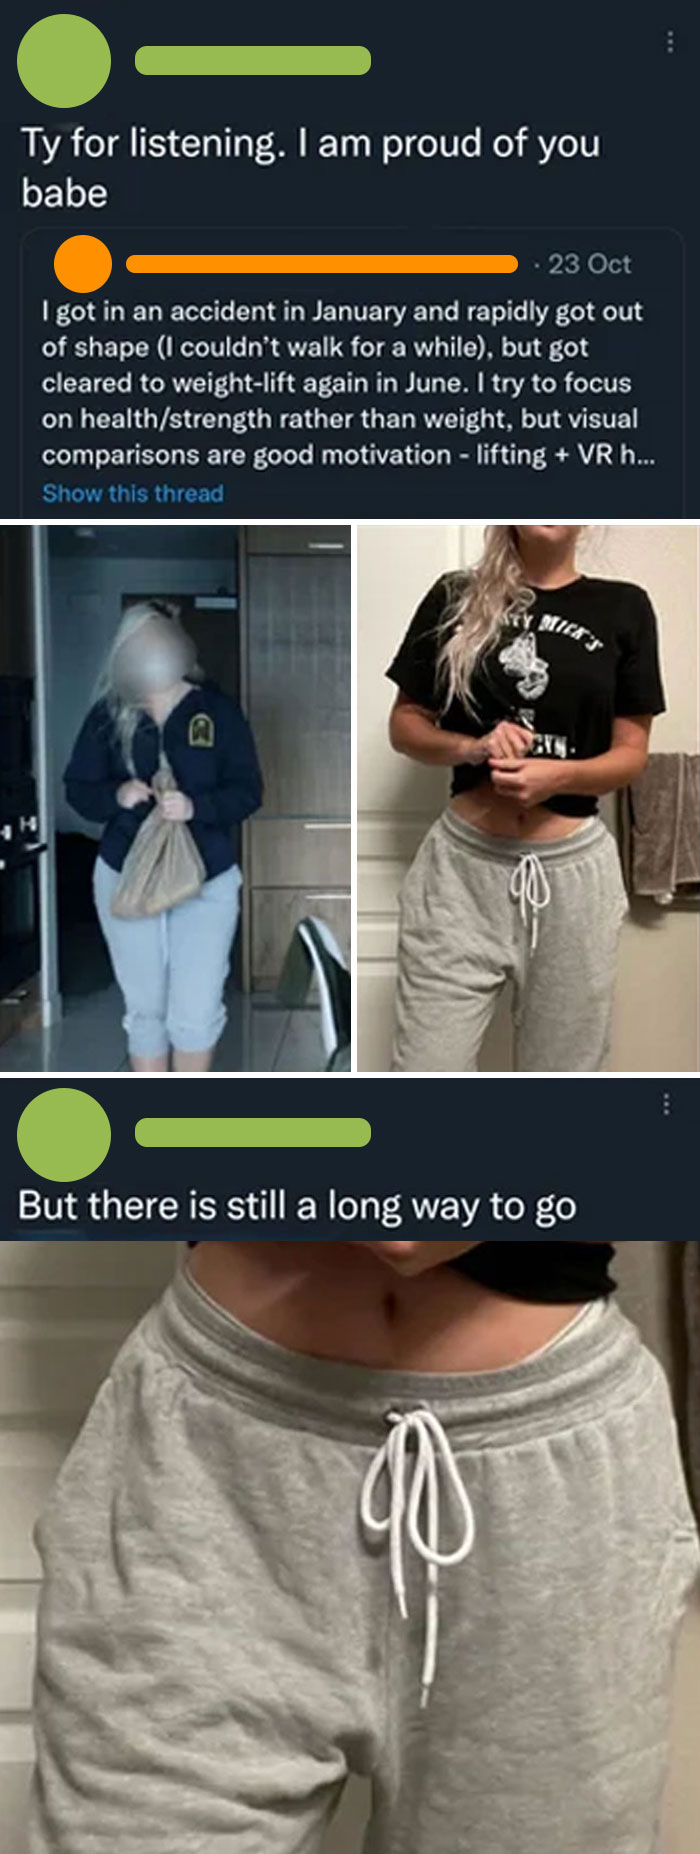 This Is The Most Neck Beardiest Thing I've Seen In A While. The Second Picture Is His, Telling Her She Has A Long Way To Go